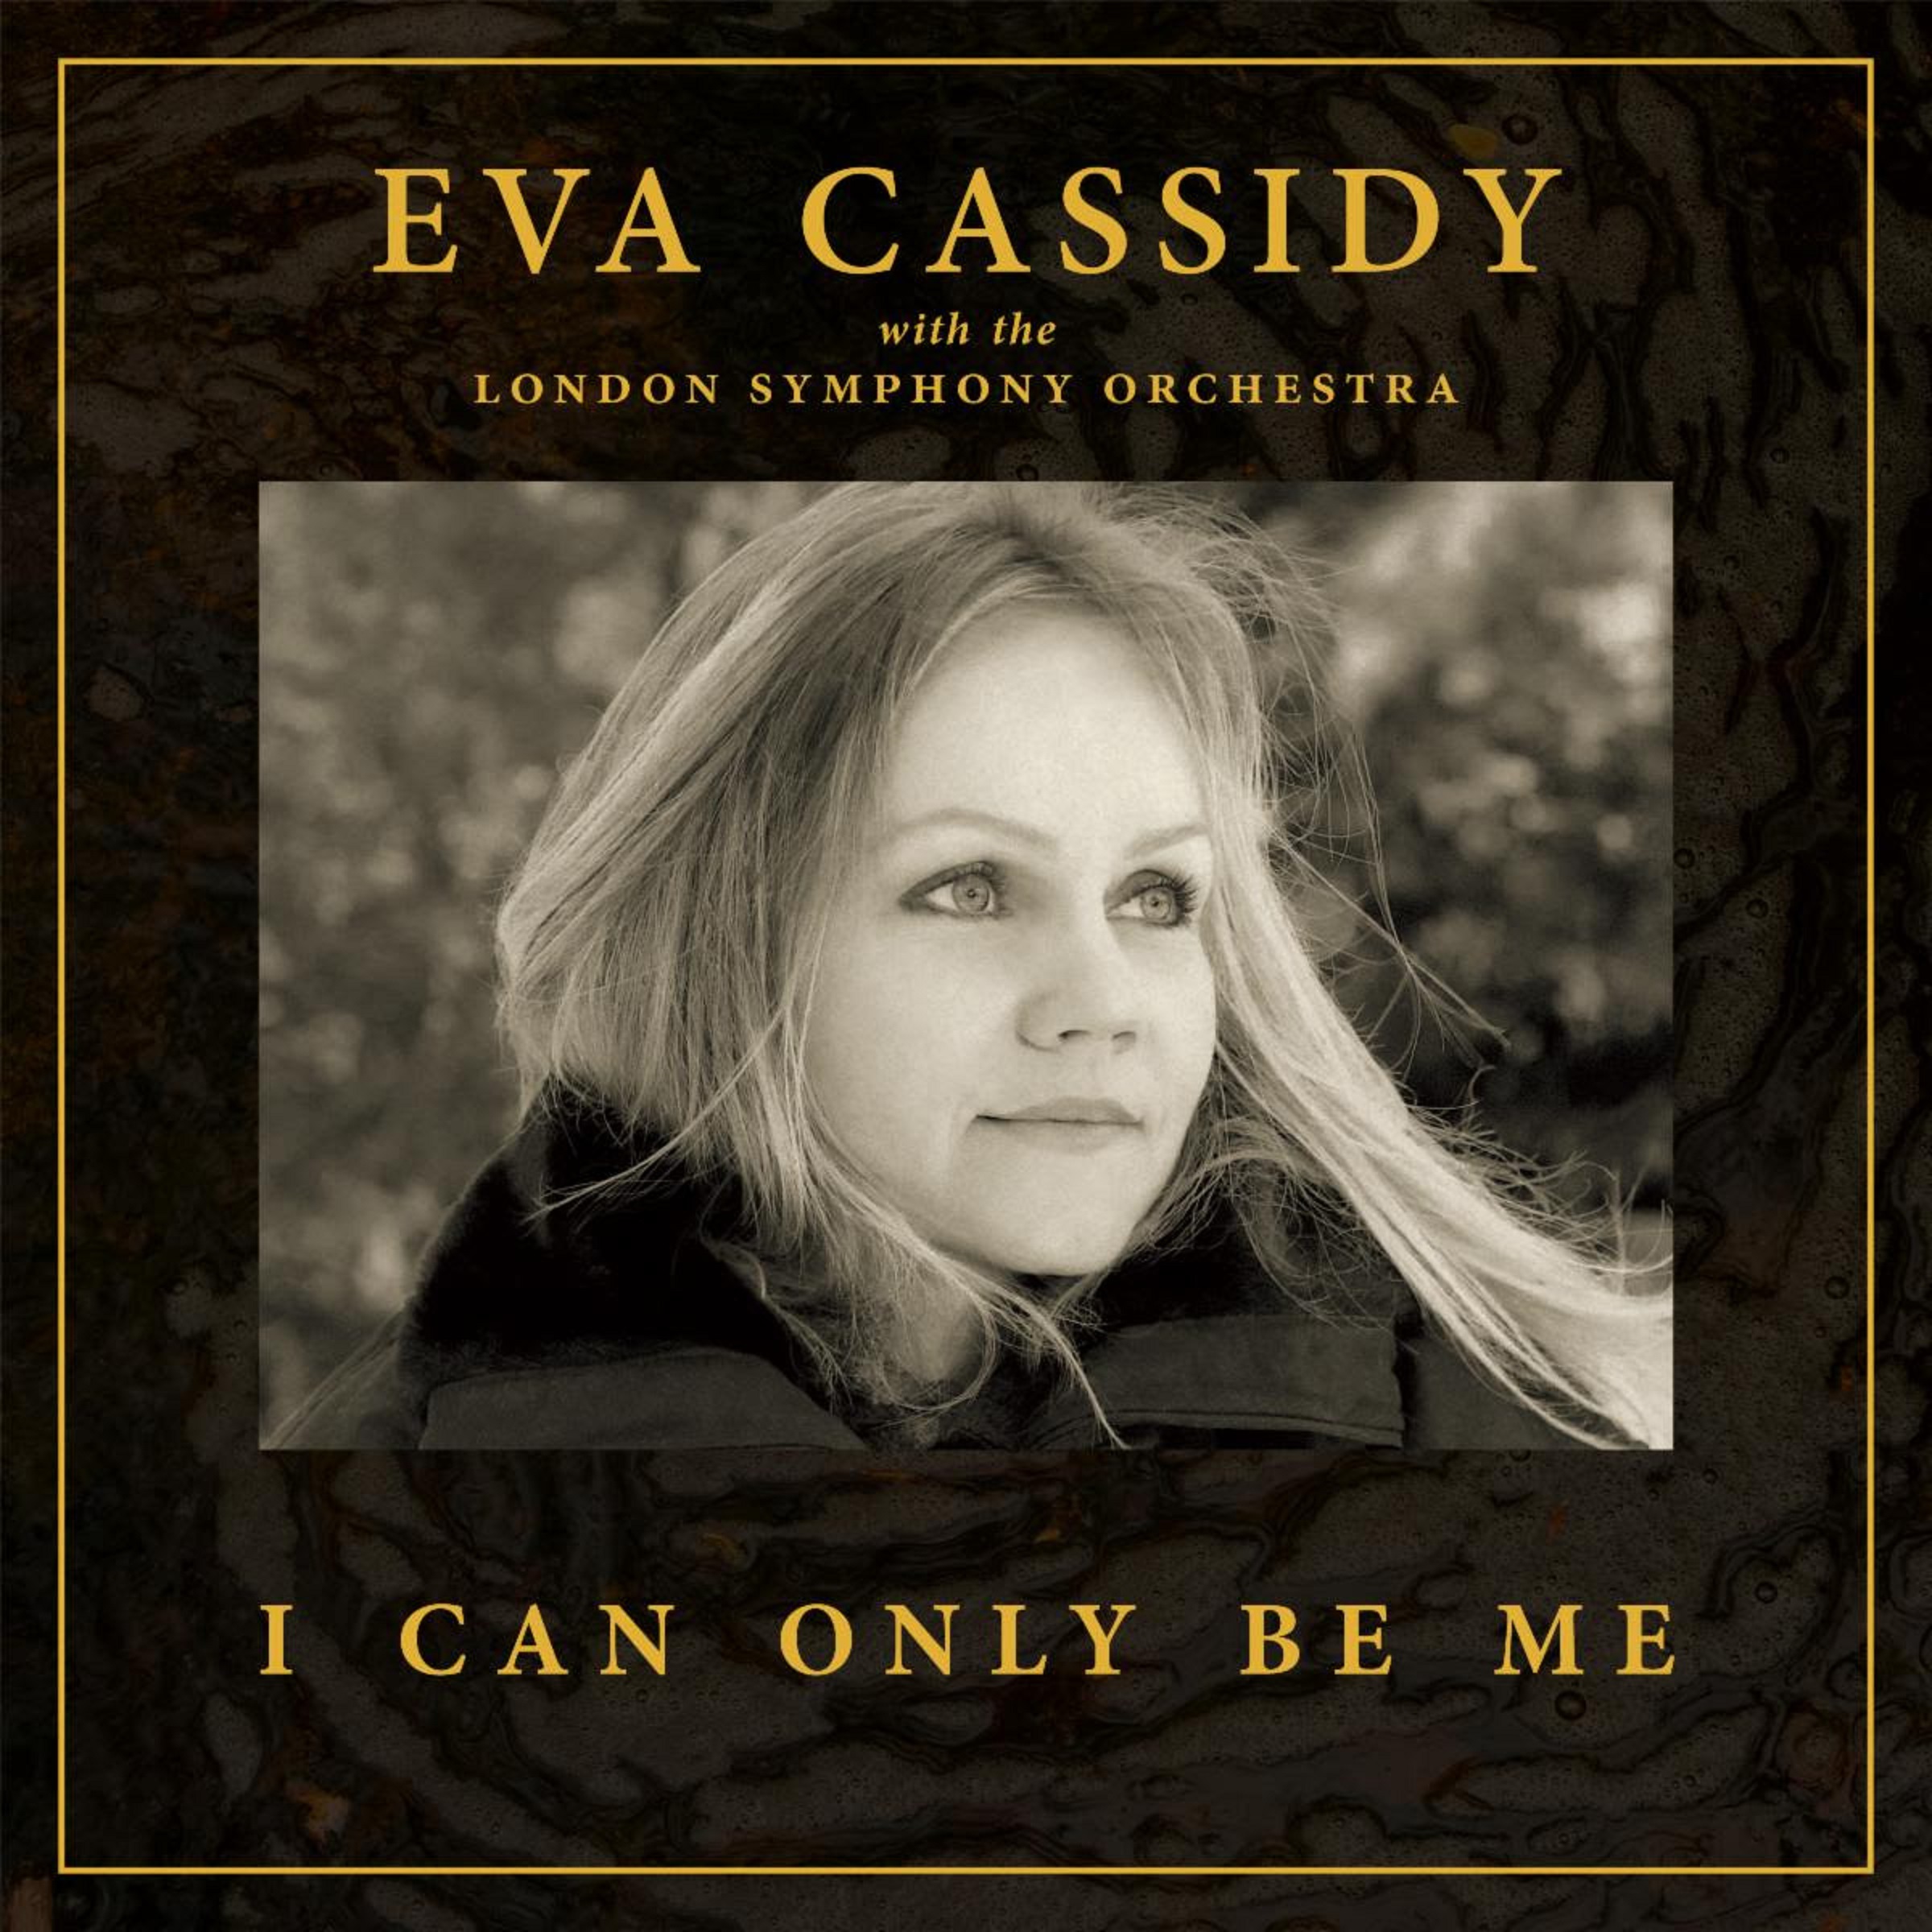 Eva Cassidy with London Symphony Orchestra "I Can Only Be Me" Album Debuts at #1 on Billboard's Classical Crossover Chart